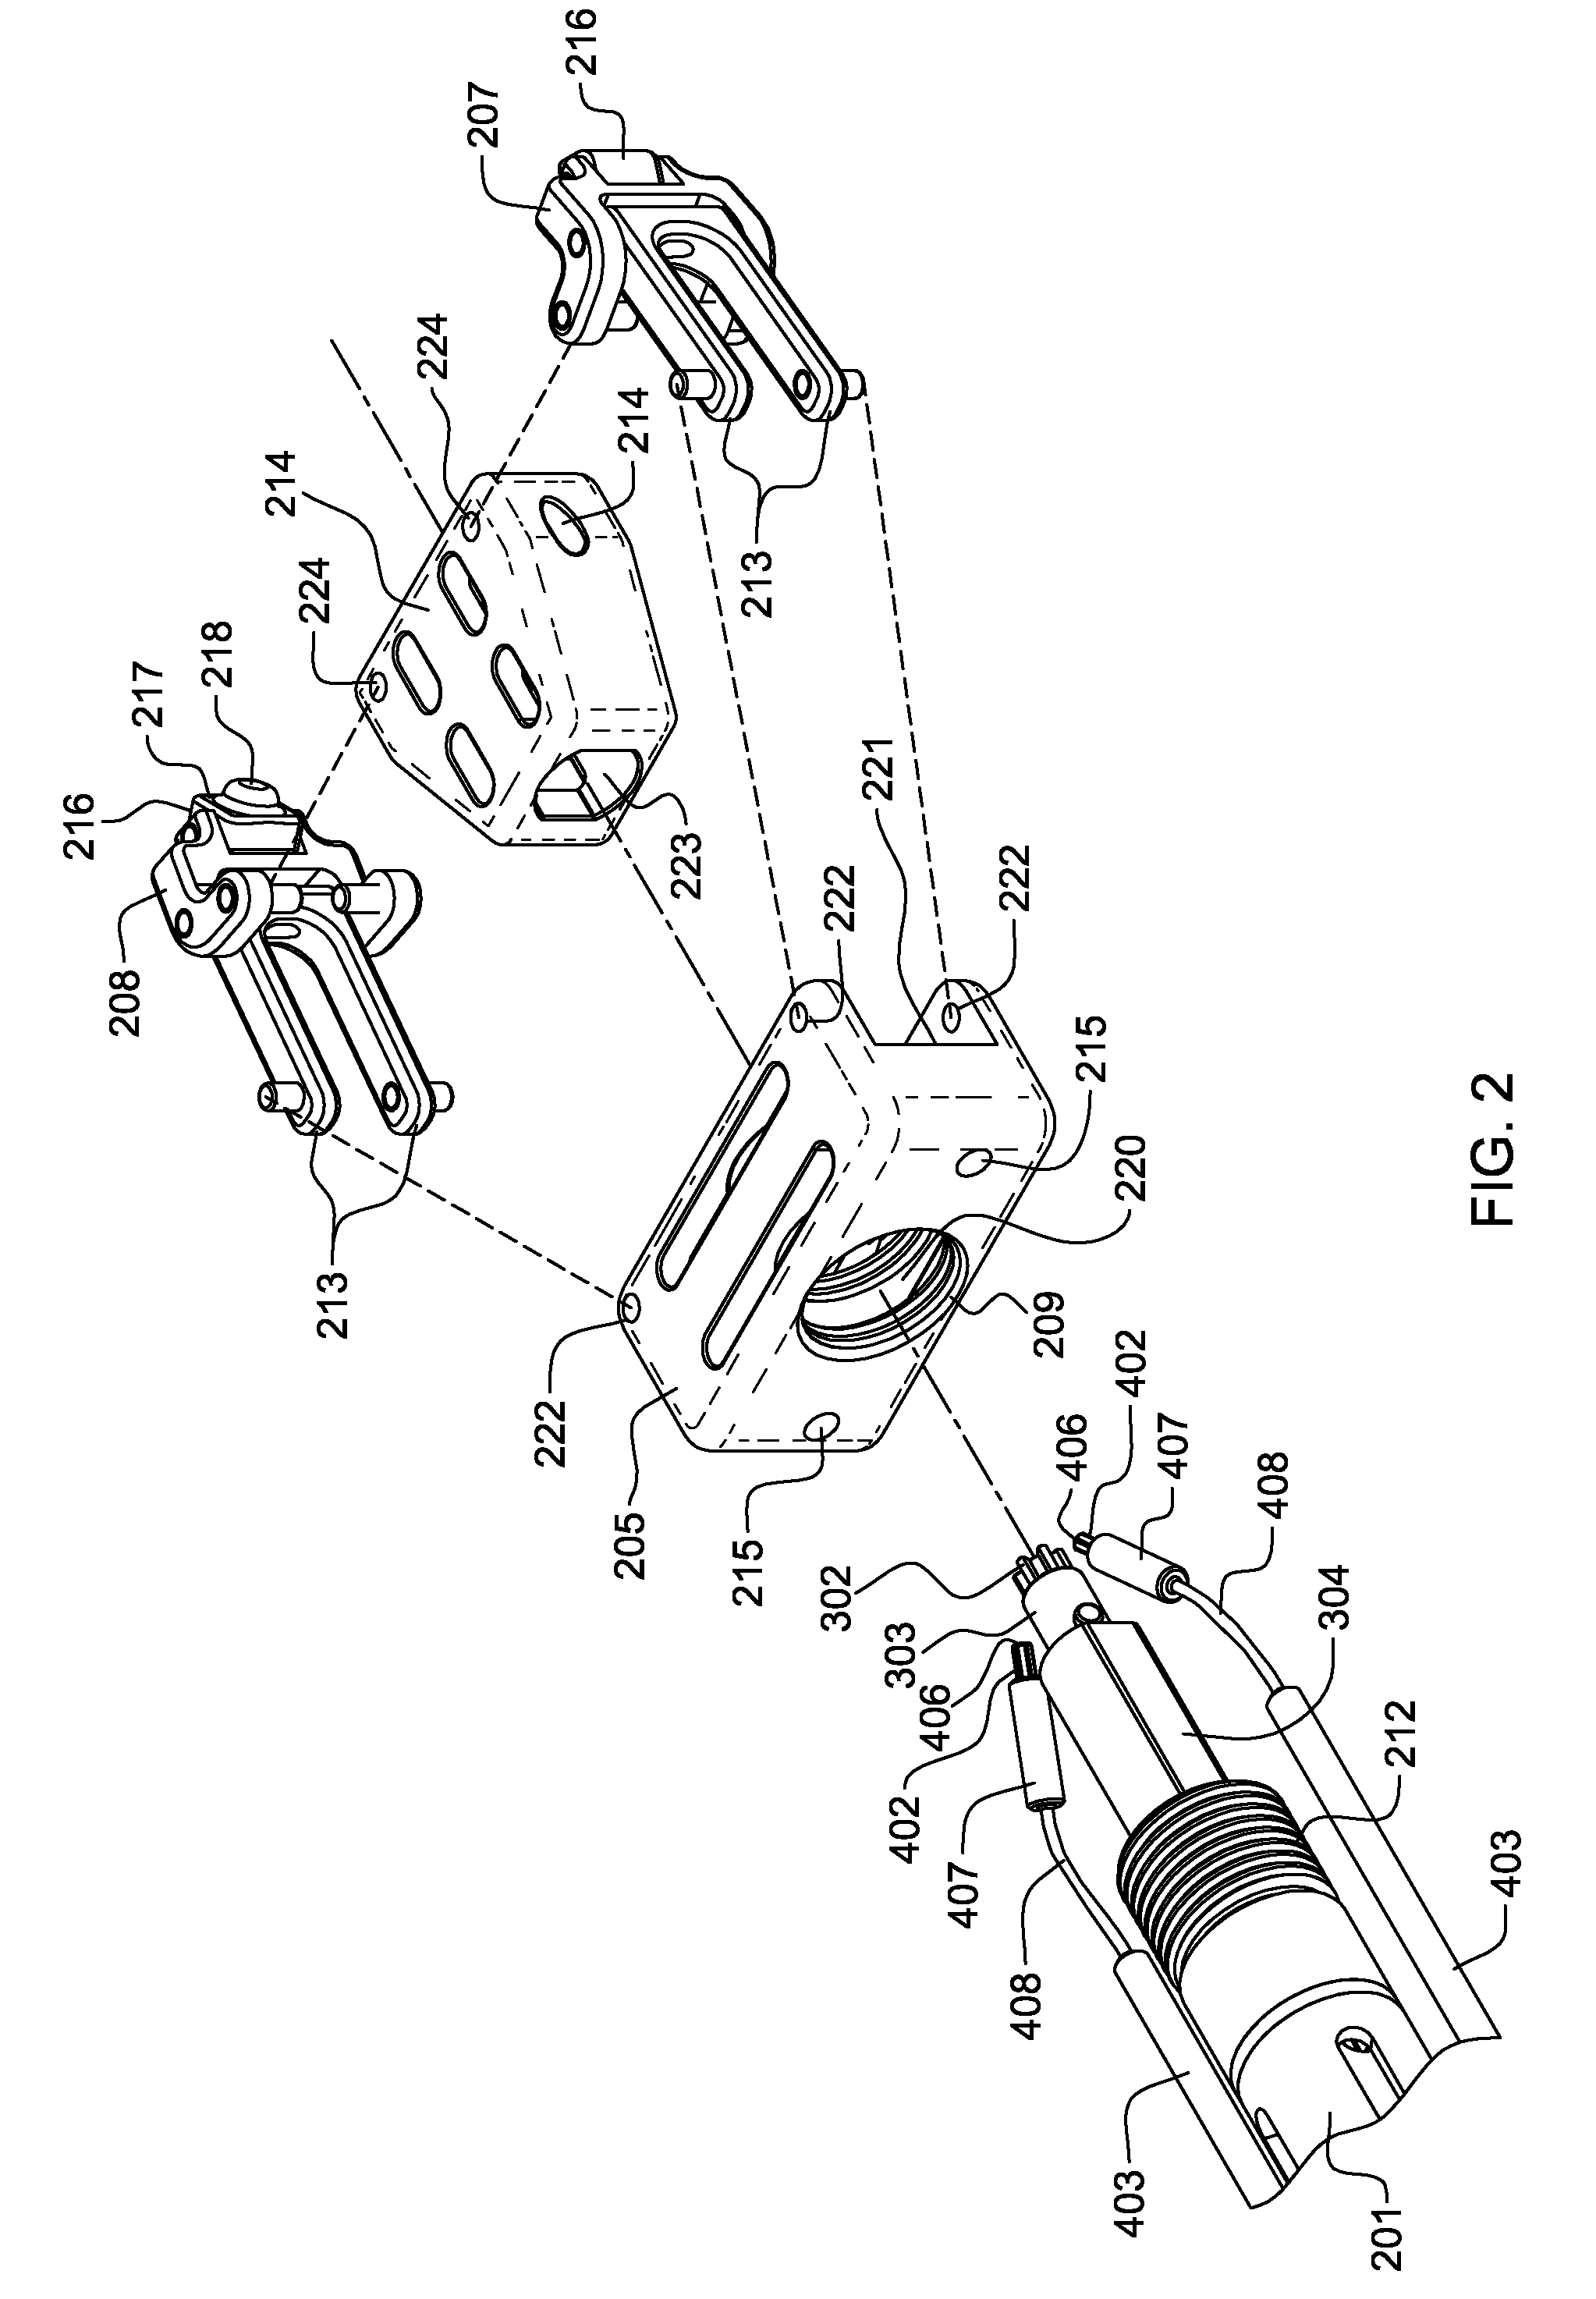 Surgical instrument and method of use for inserting an implant between two bones